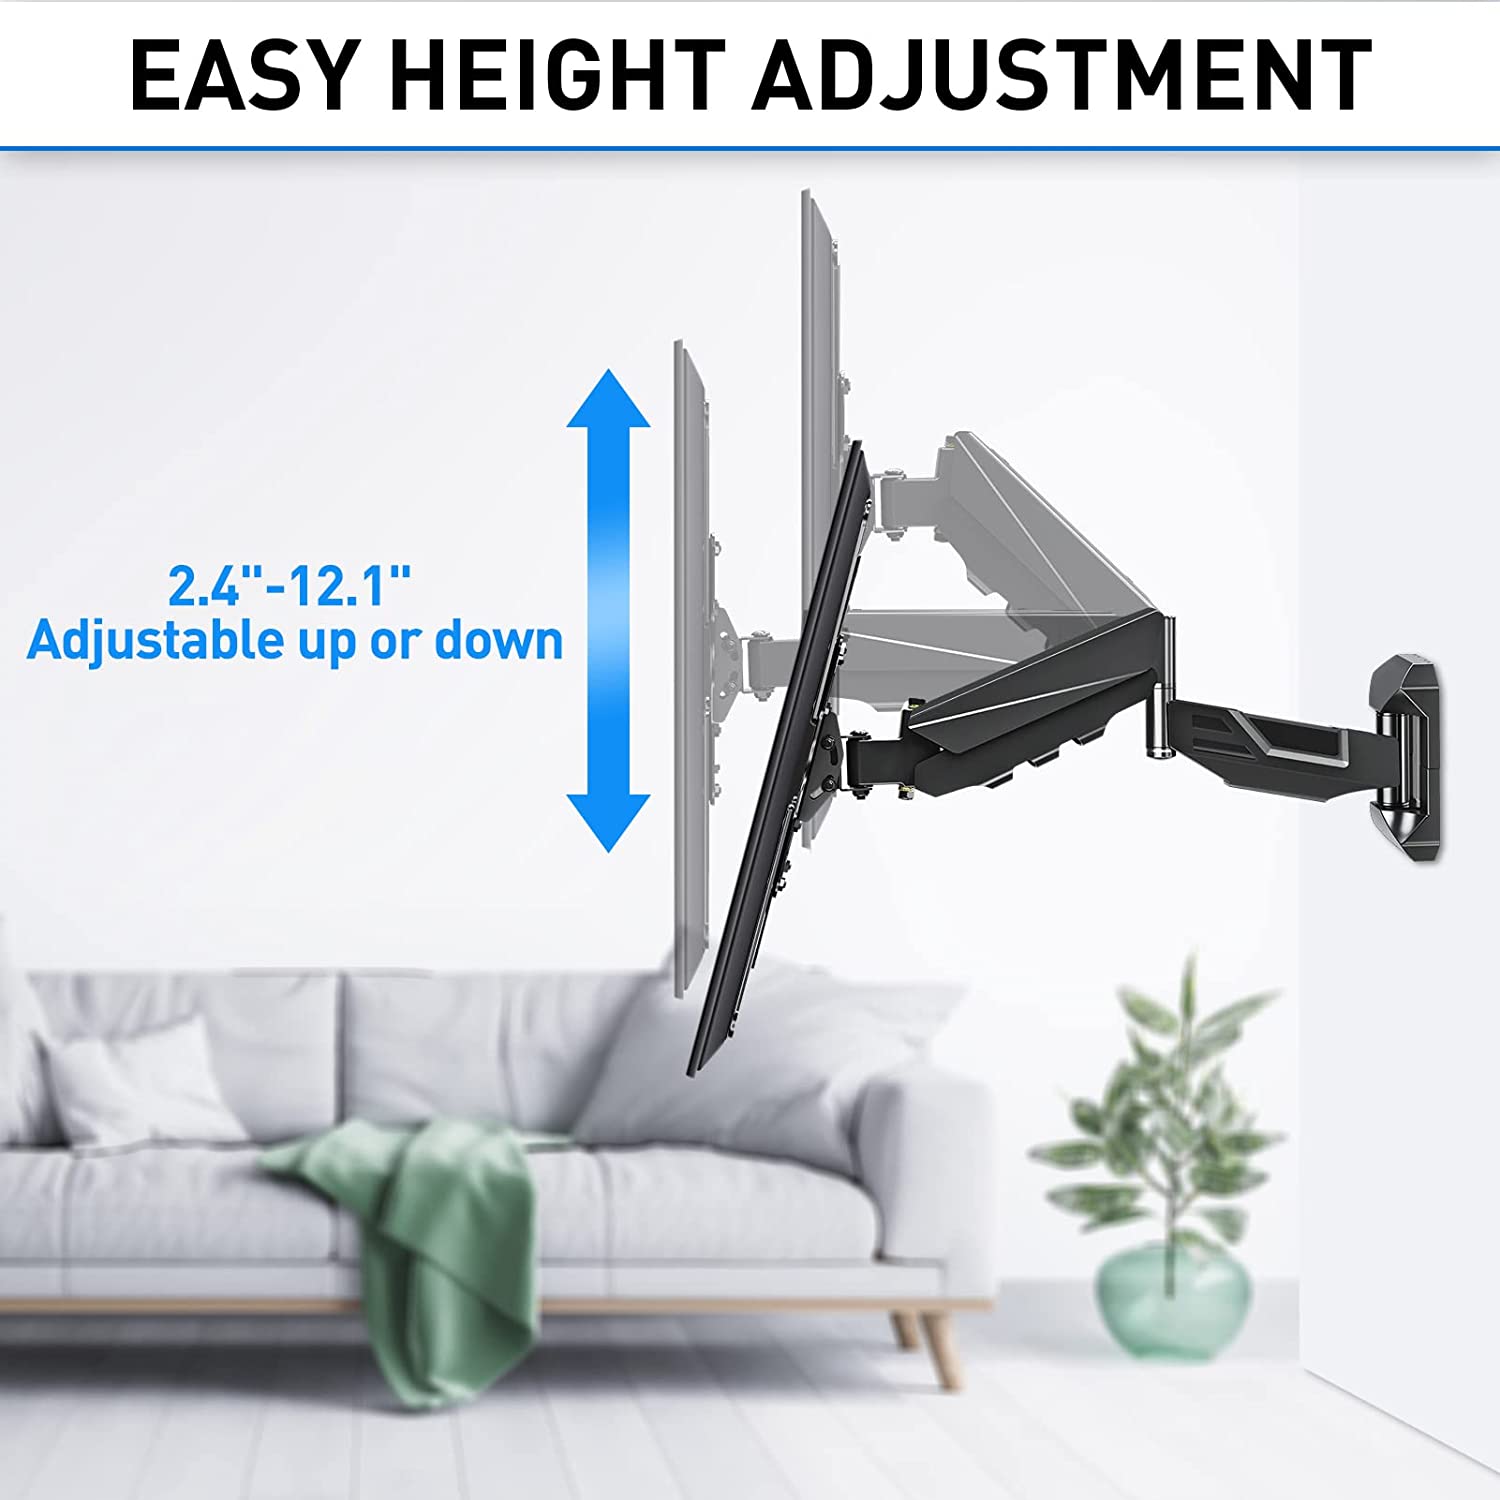 height adjustable TV wall mount from 2.4'' to 12.1''